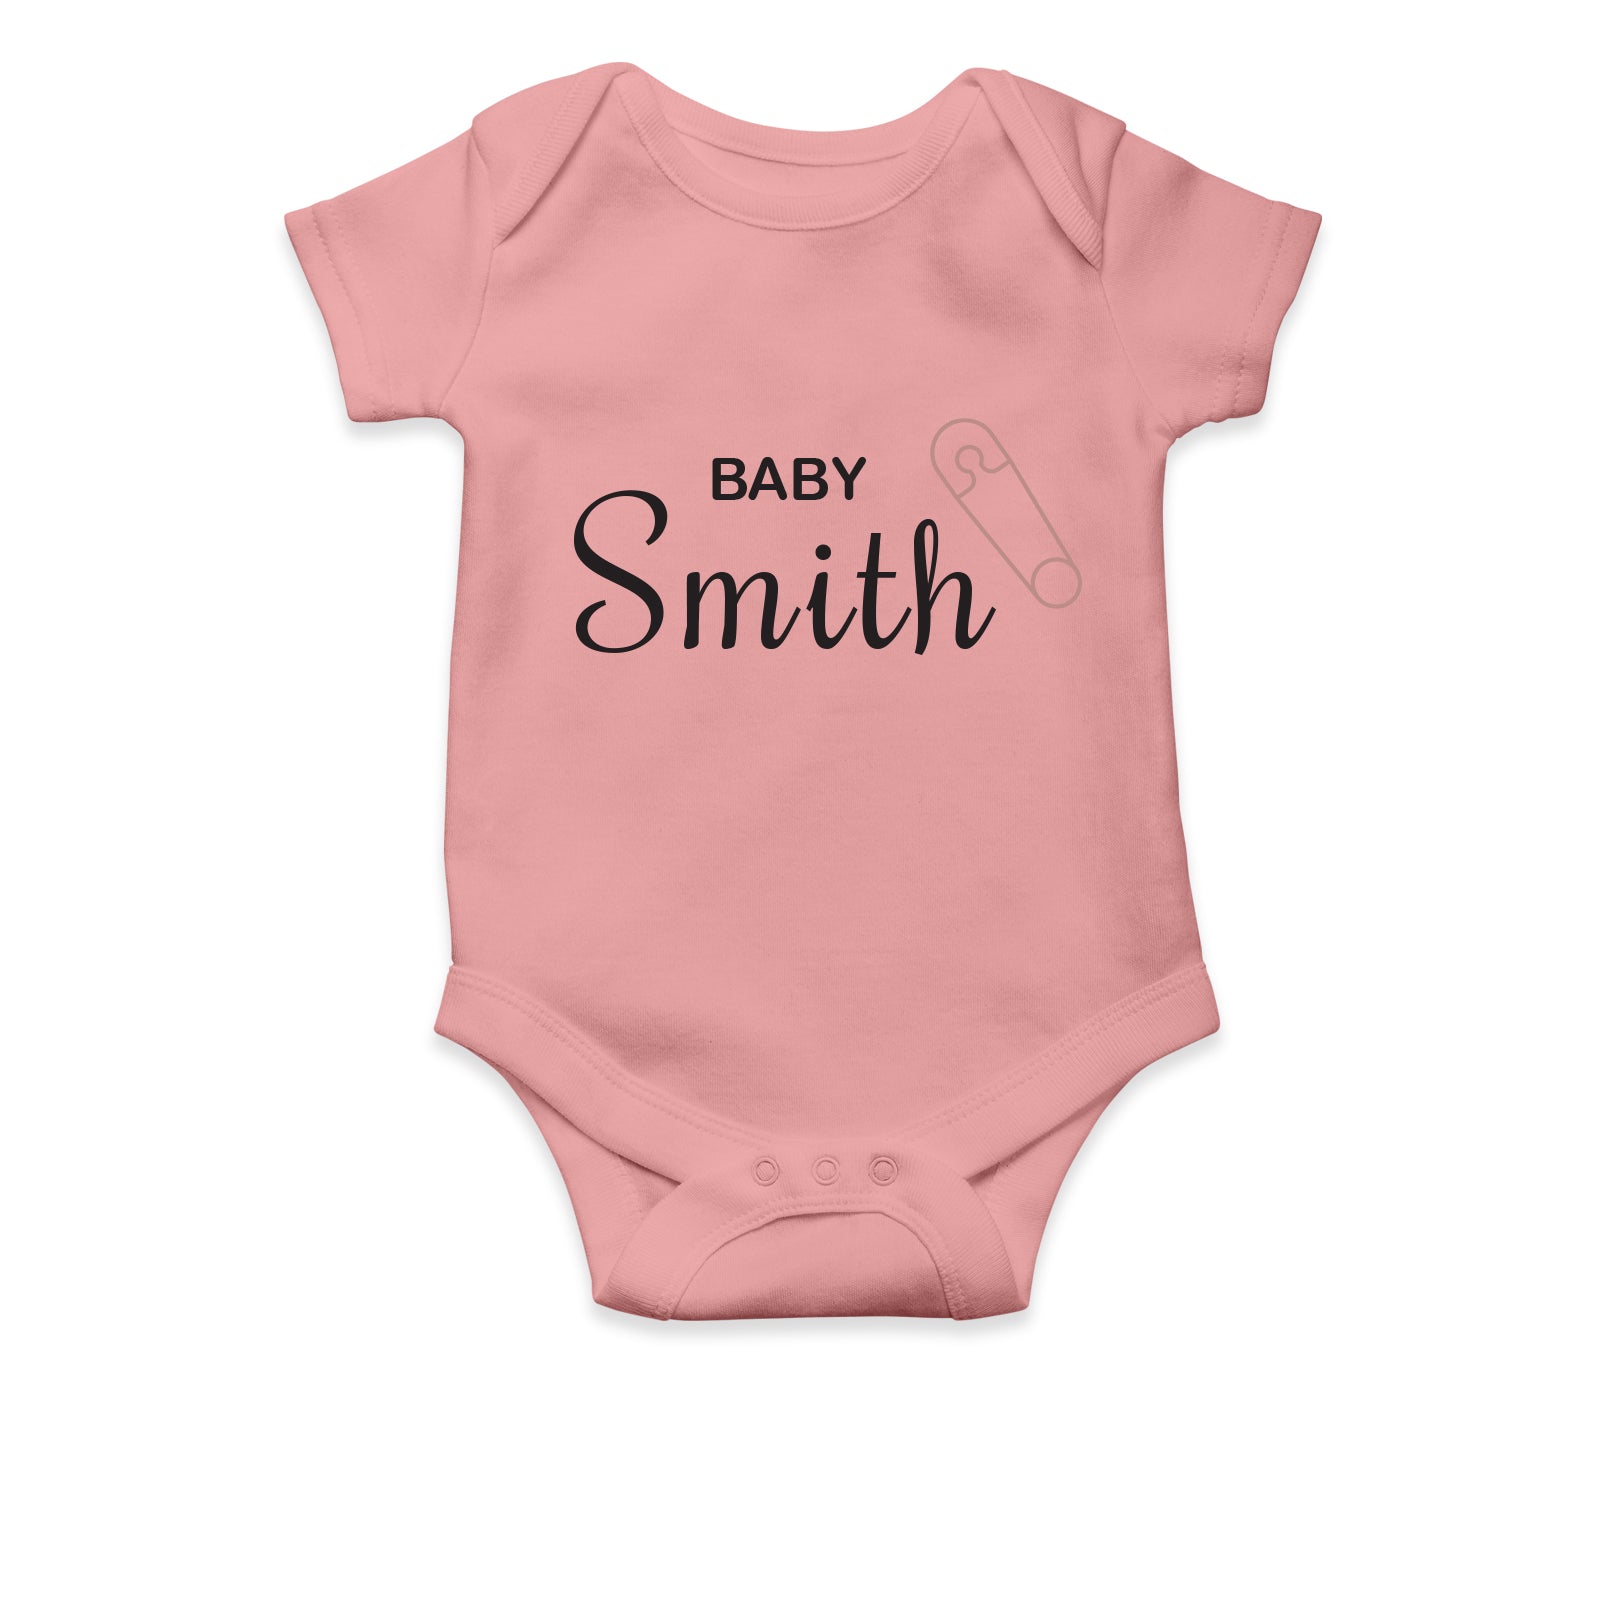 Personalised White Baby Body Suit Grow Vest - Microphone